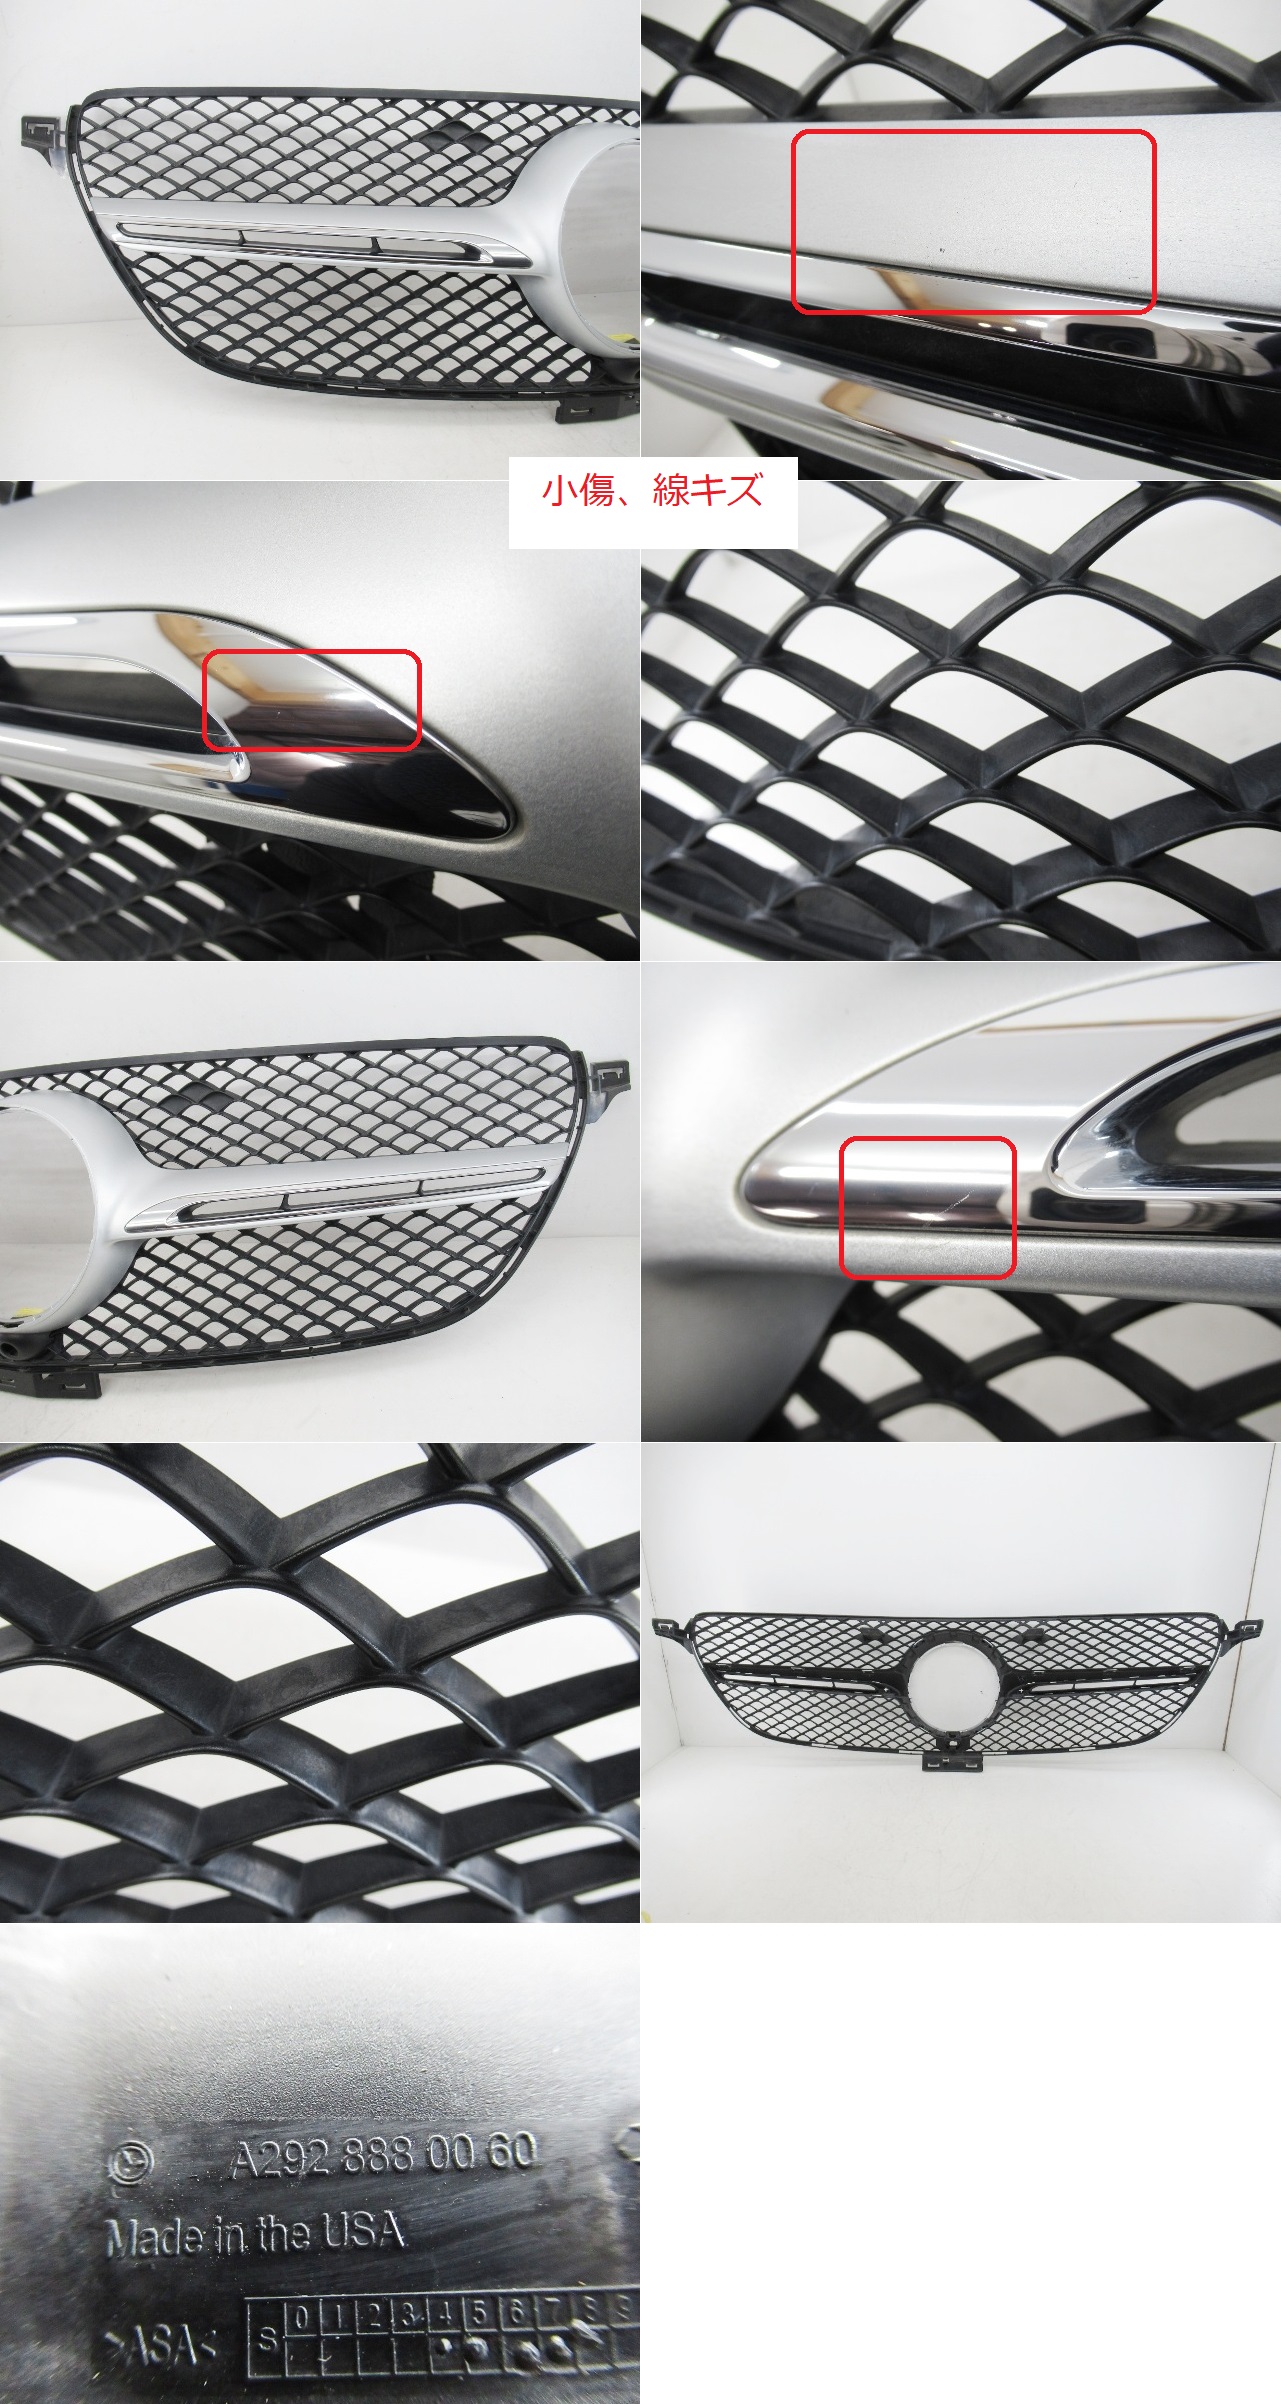 Used]Benz GLE coupe C292 Genuine Radiator Grille [A 292 888 00 60]  (M079317) - BE FORWARD Auto Parts